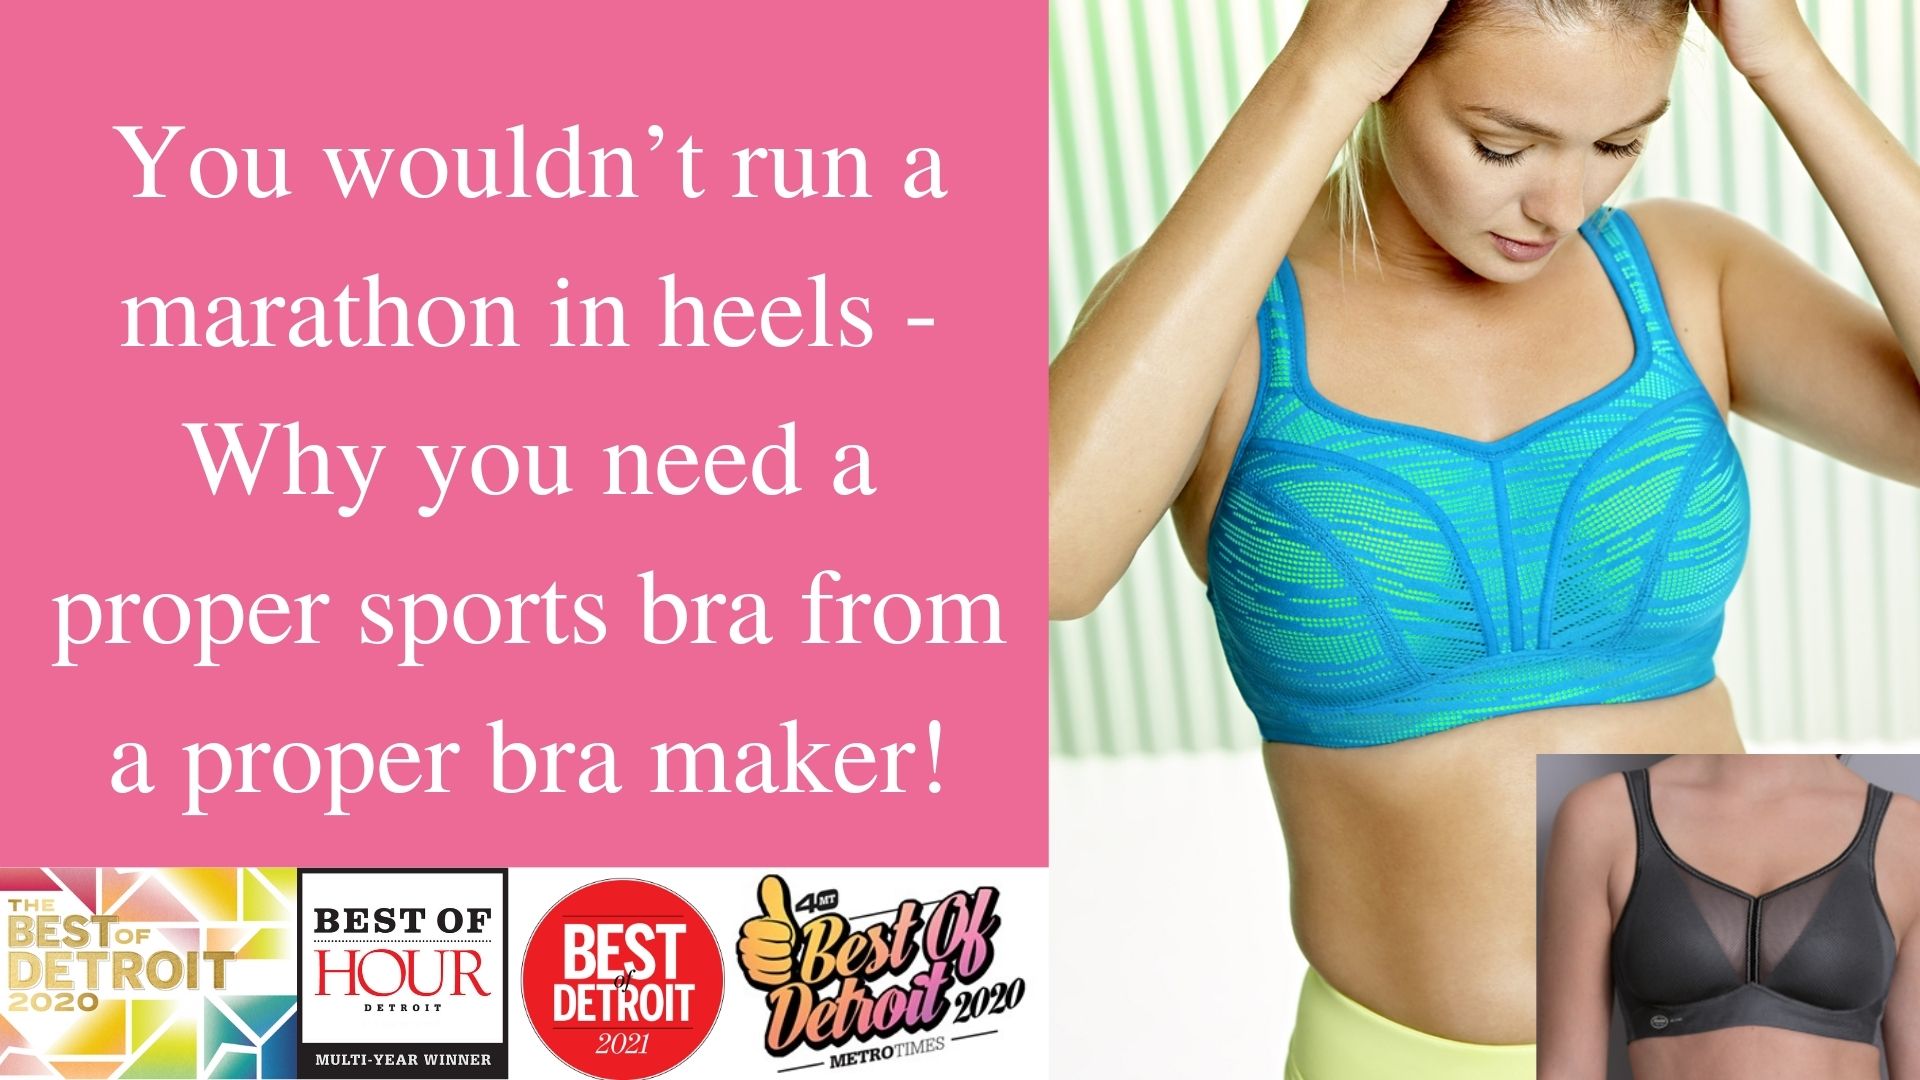 You wouldn't run a marathon in heels - Why you need a proper sports bra  from a proper bra maker! - Bra~vo intimates